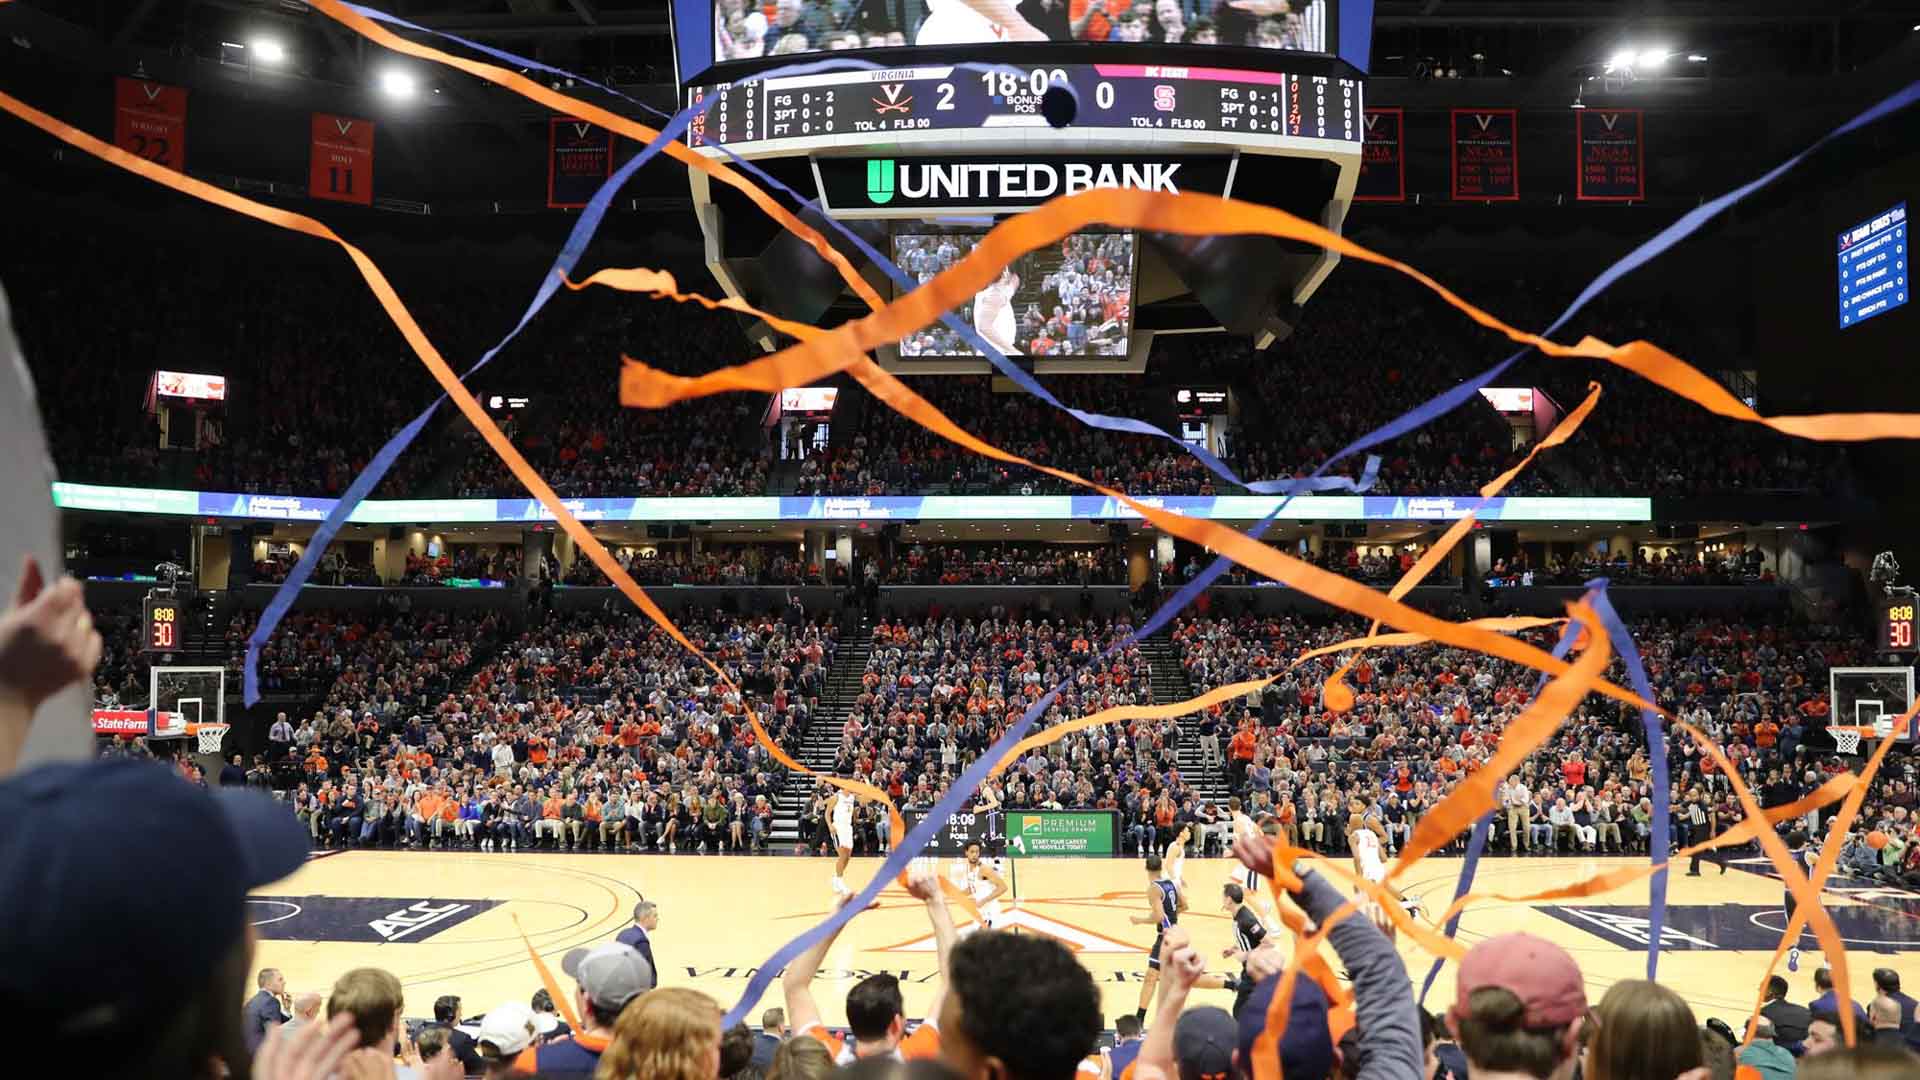 Blue and orange streamers being thrown during a basketball game